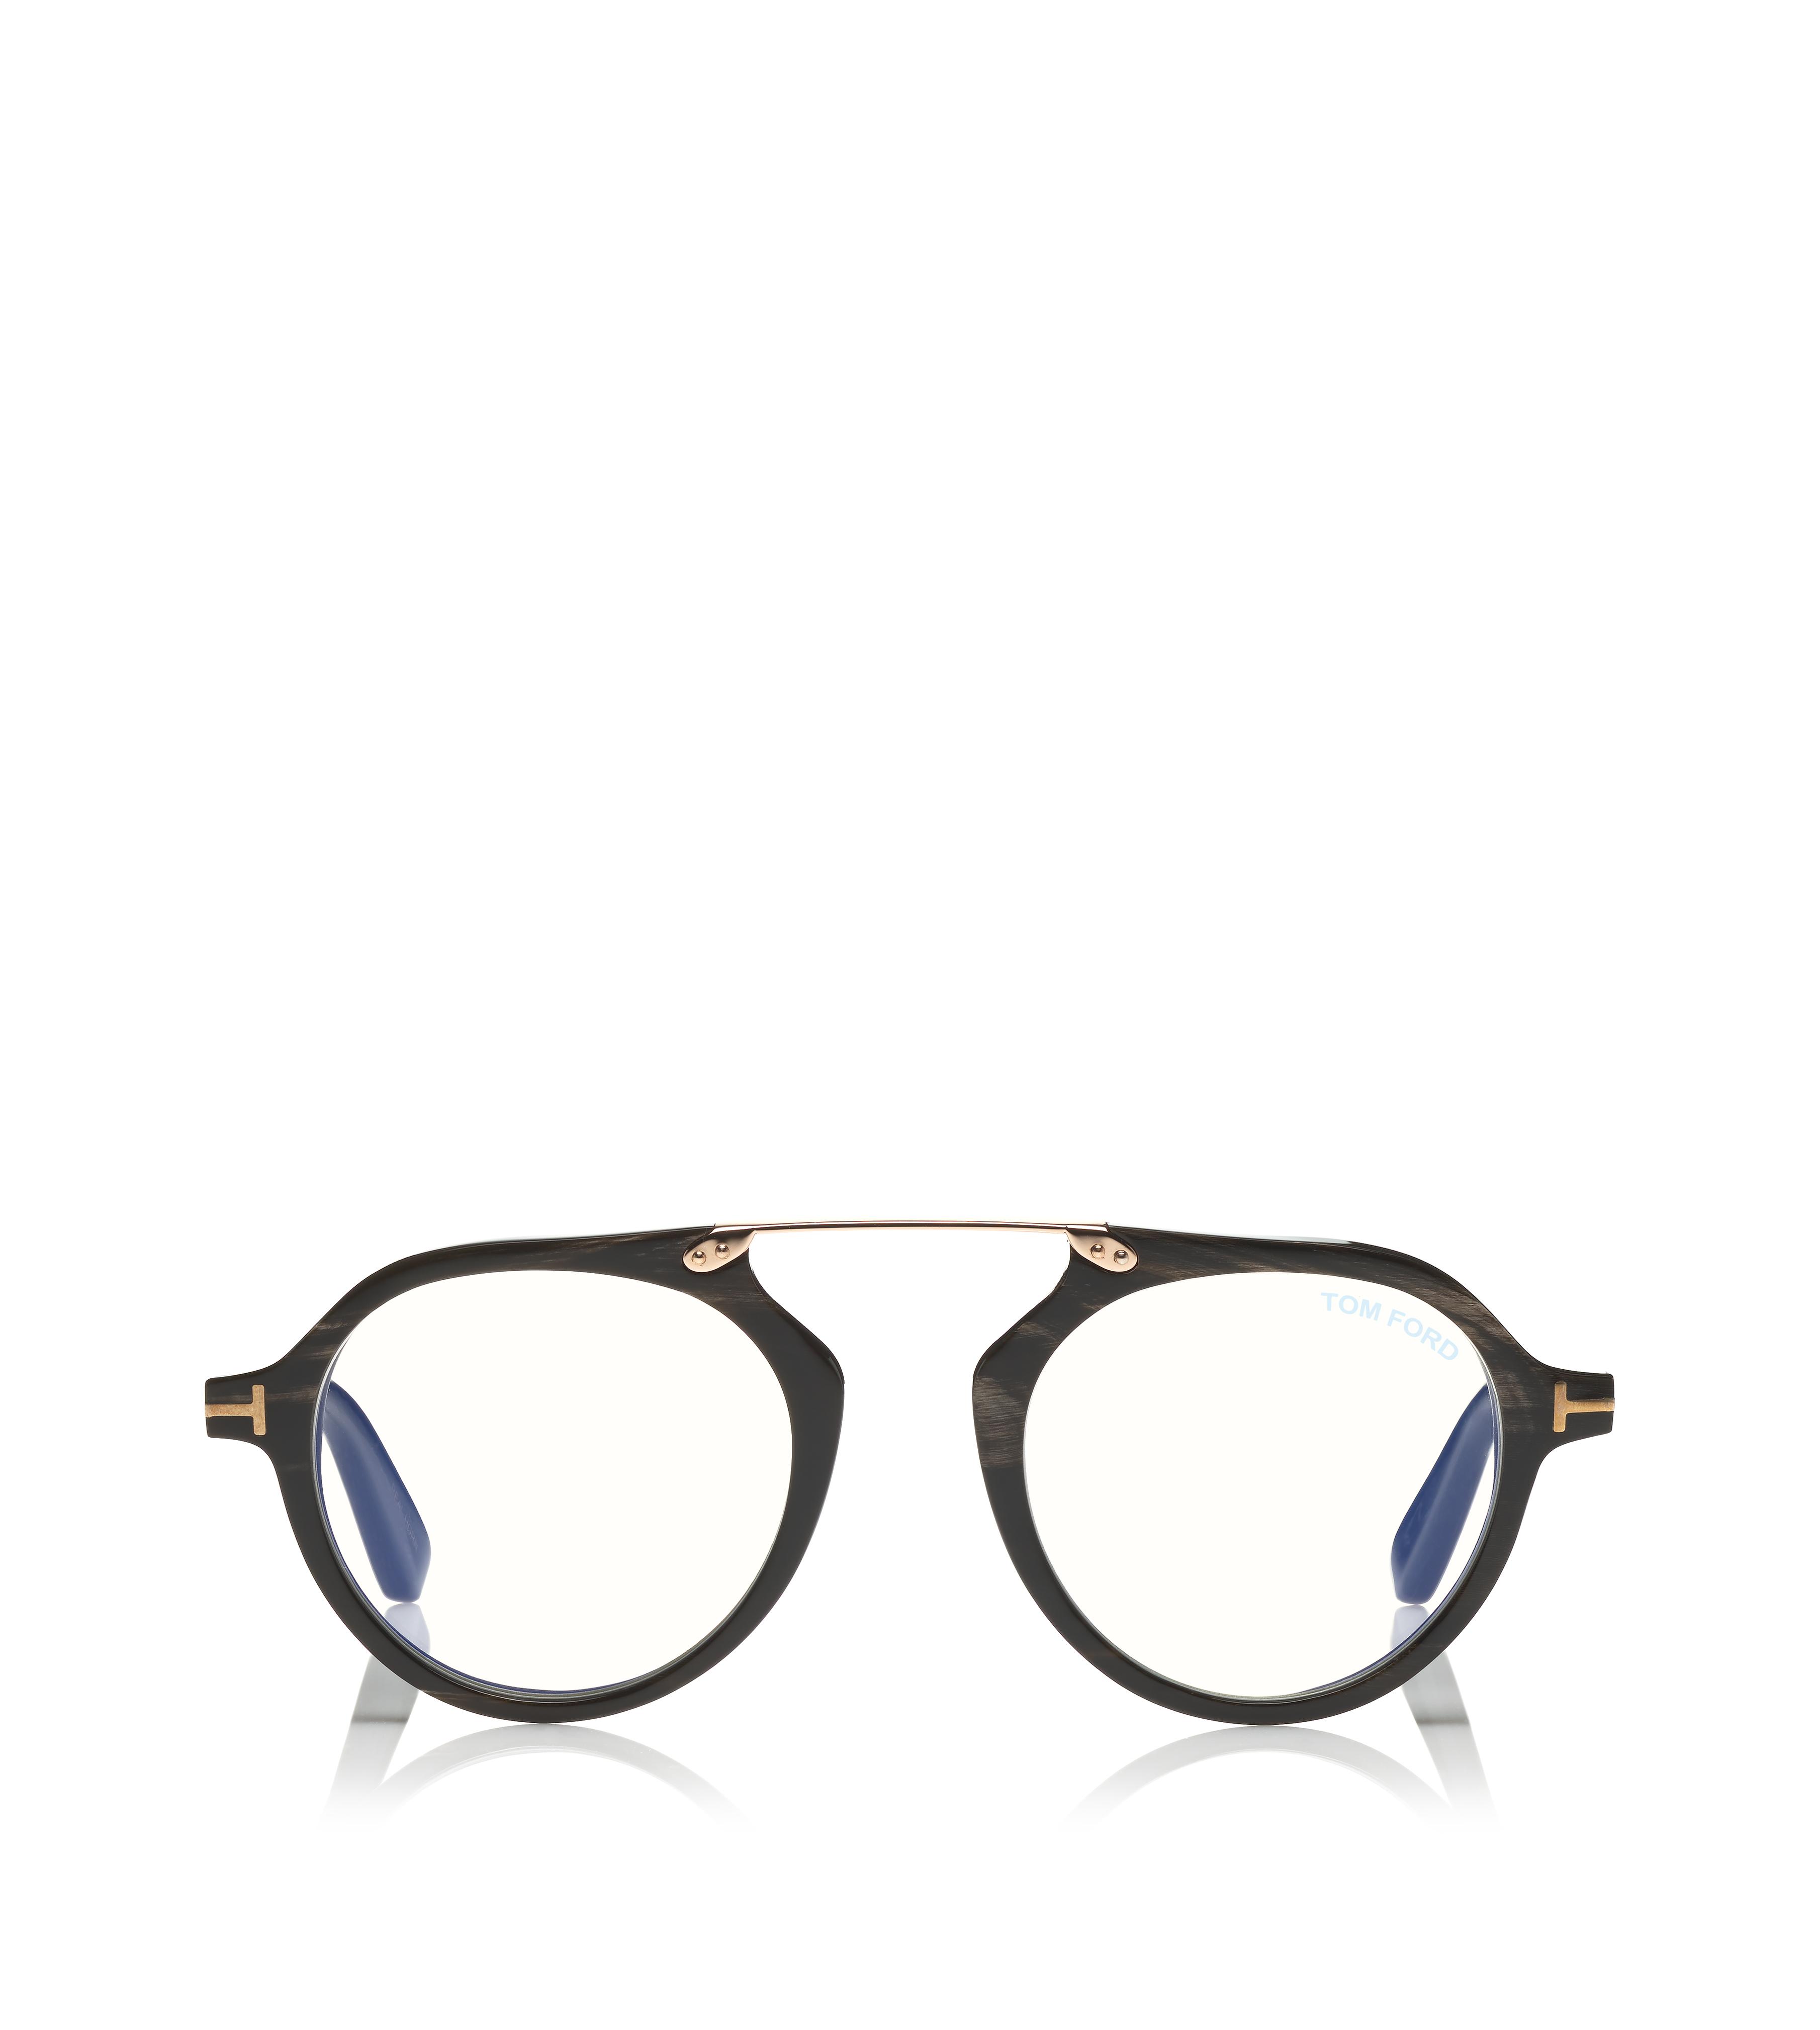 PRIVATE COLLECTION - Men's Eyewear 